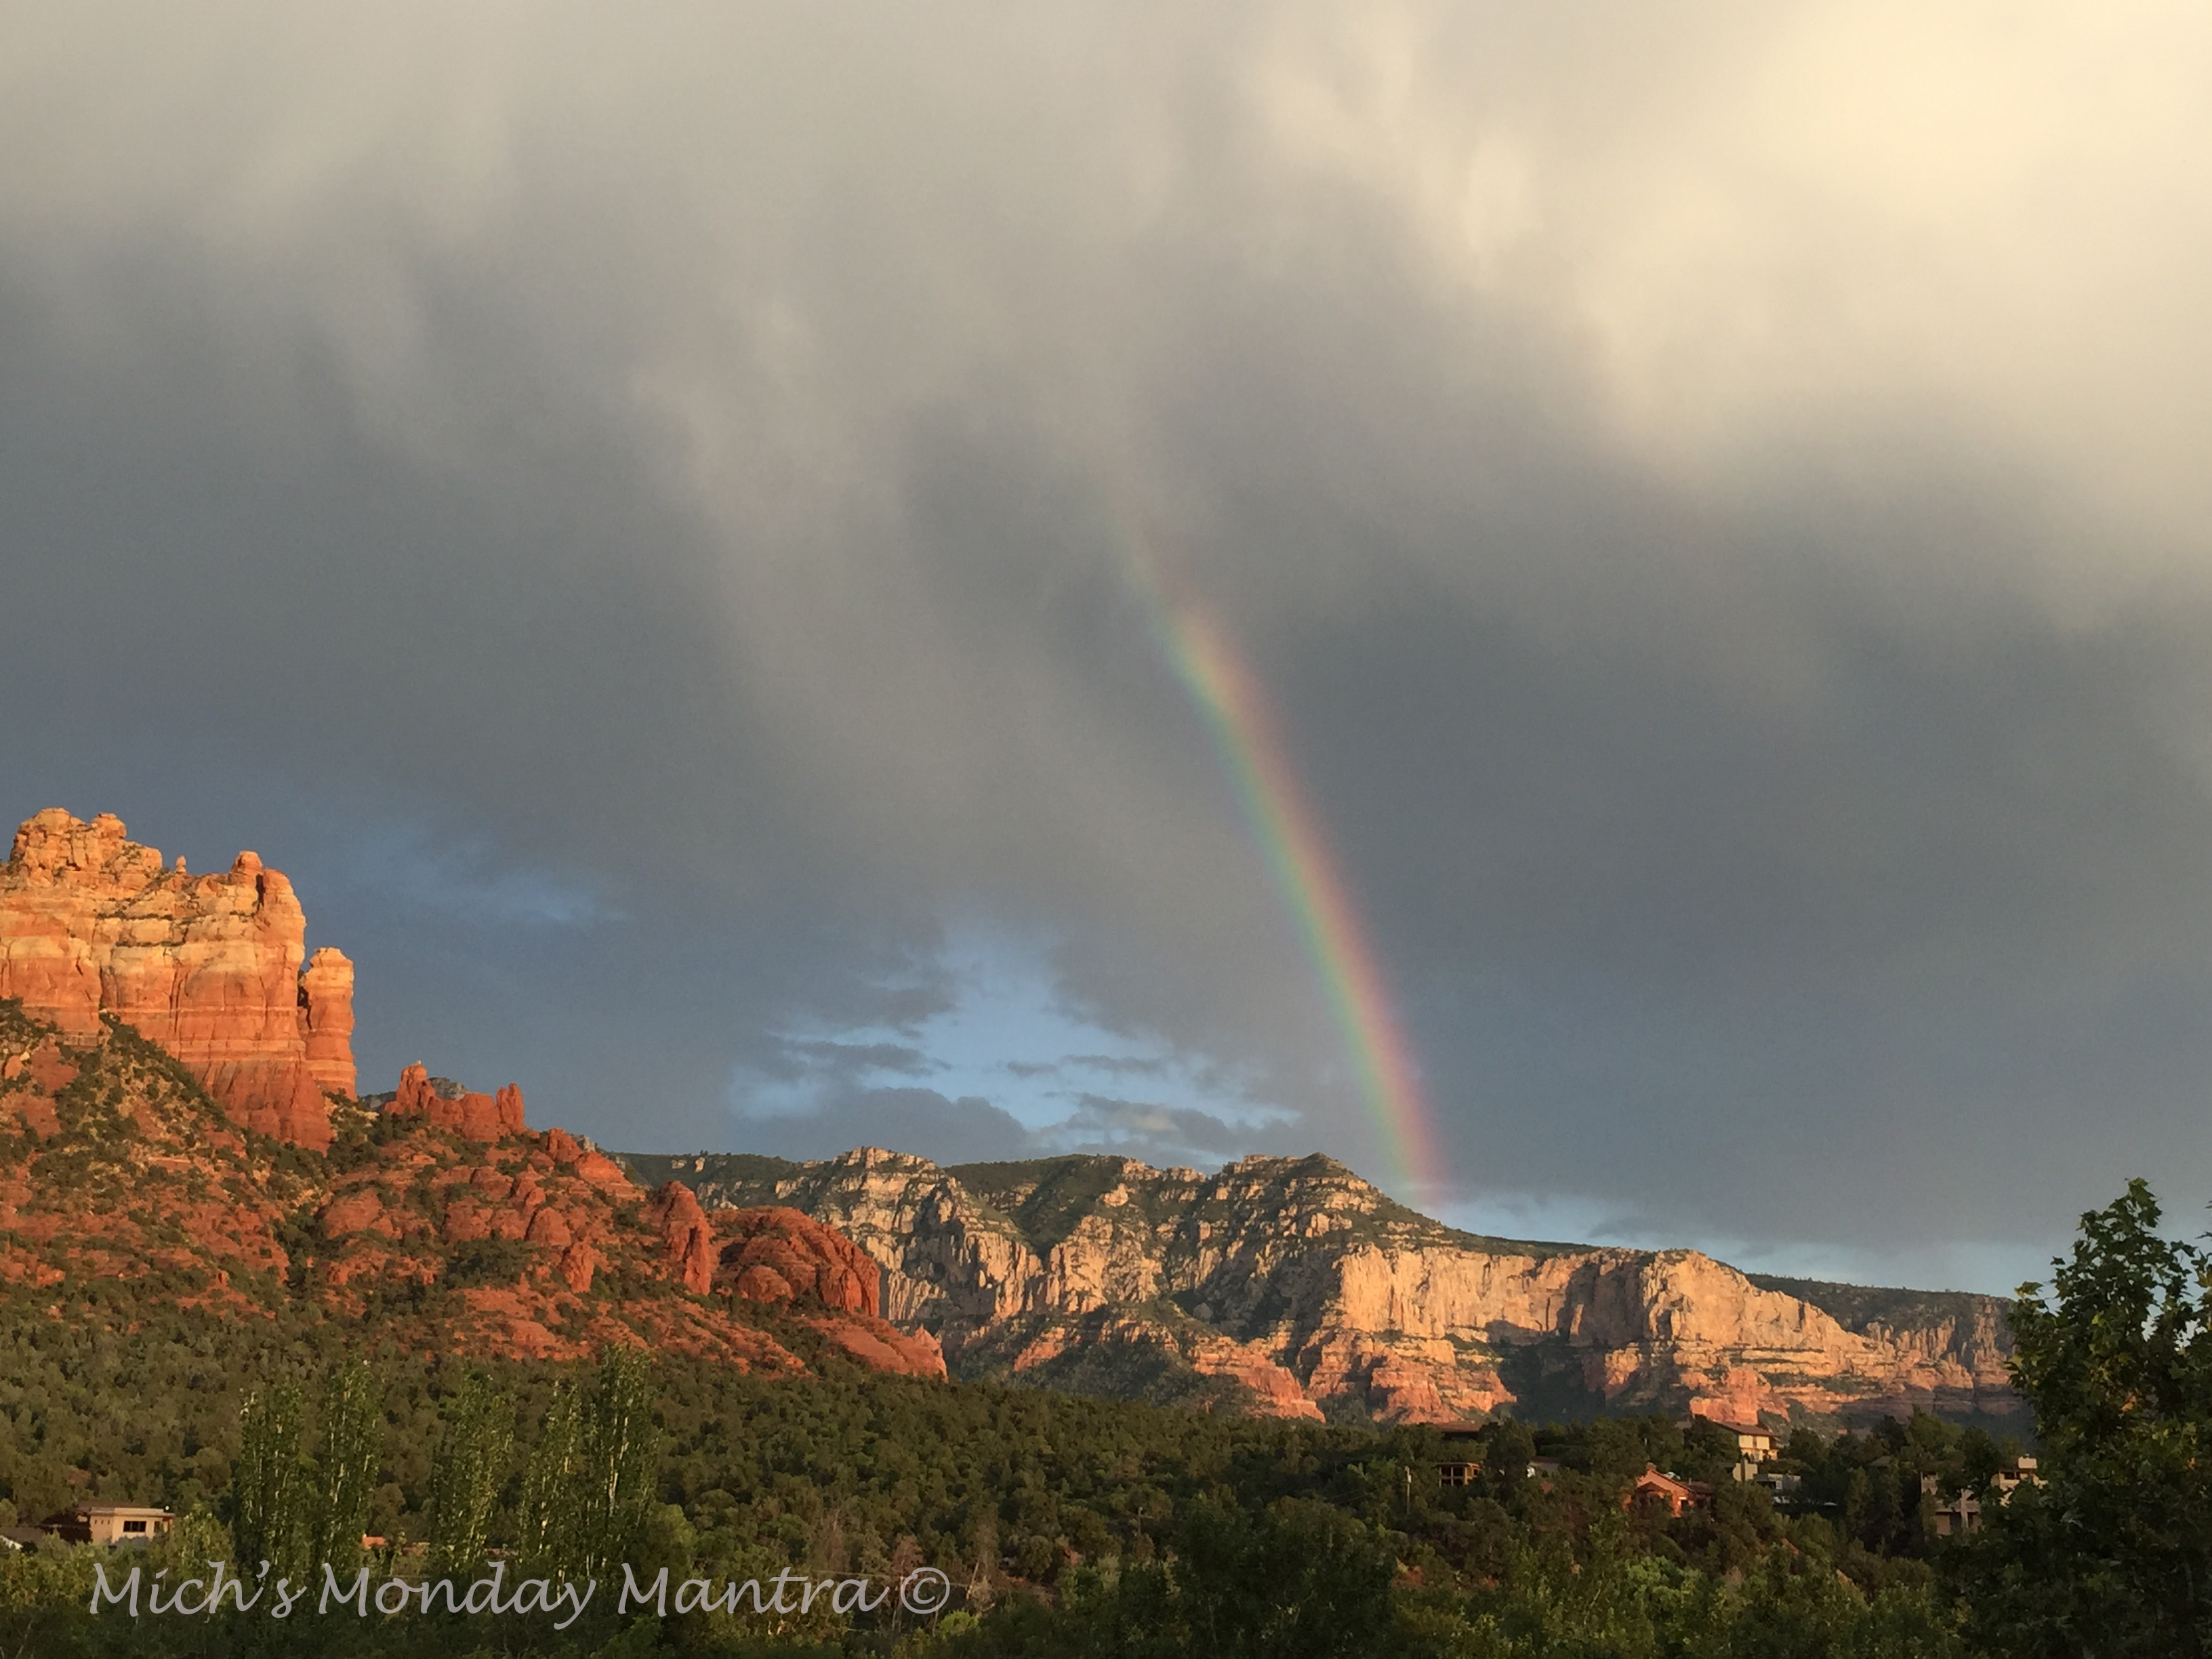 Foto Friday – Rainbows In The Sky